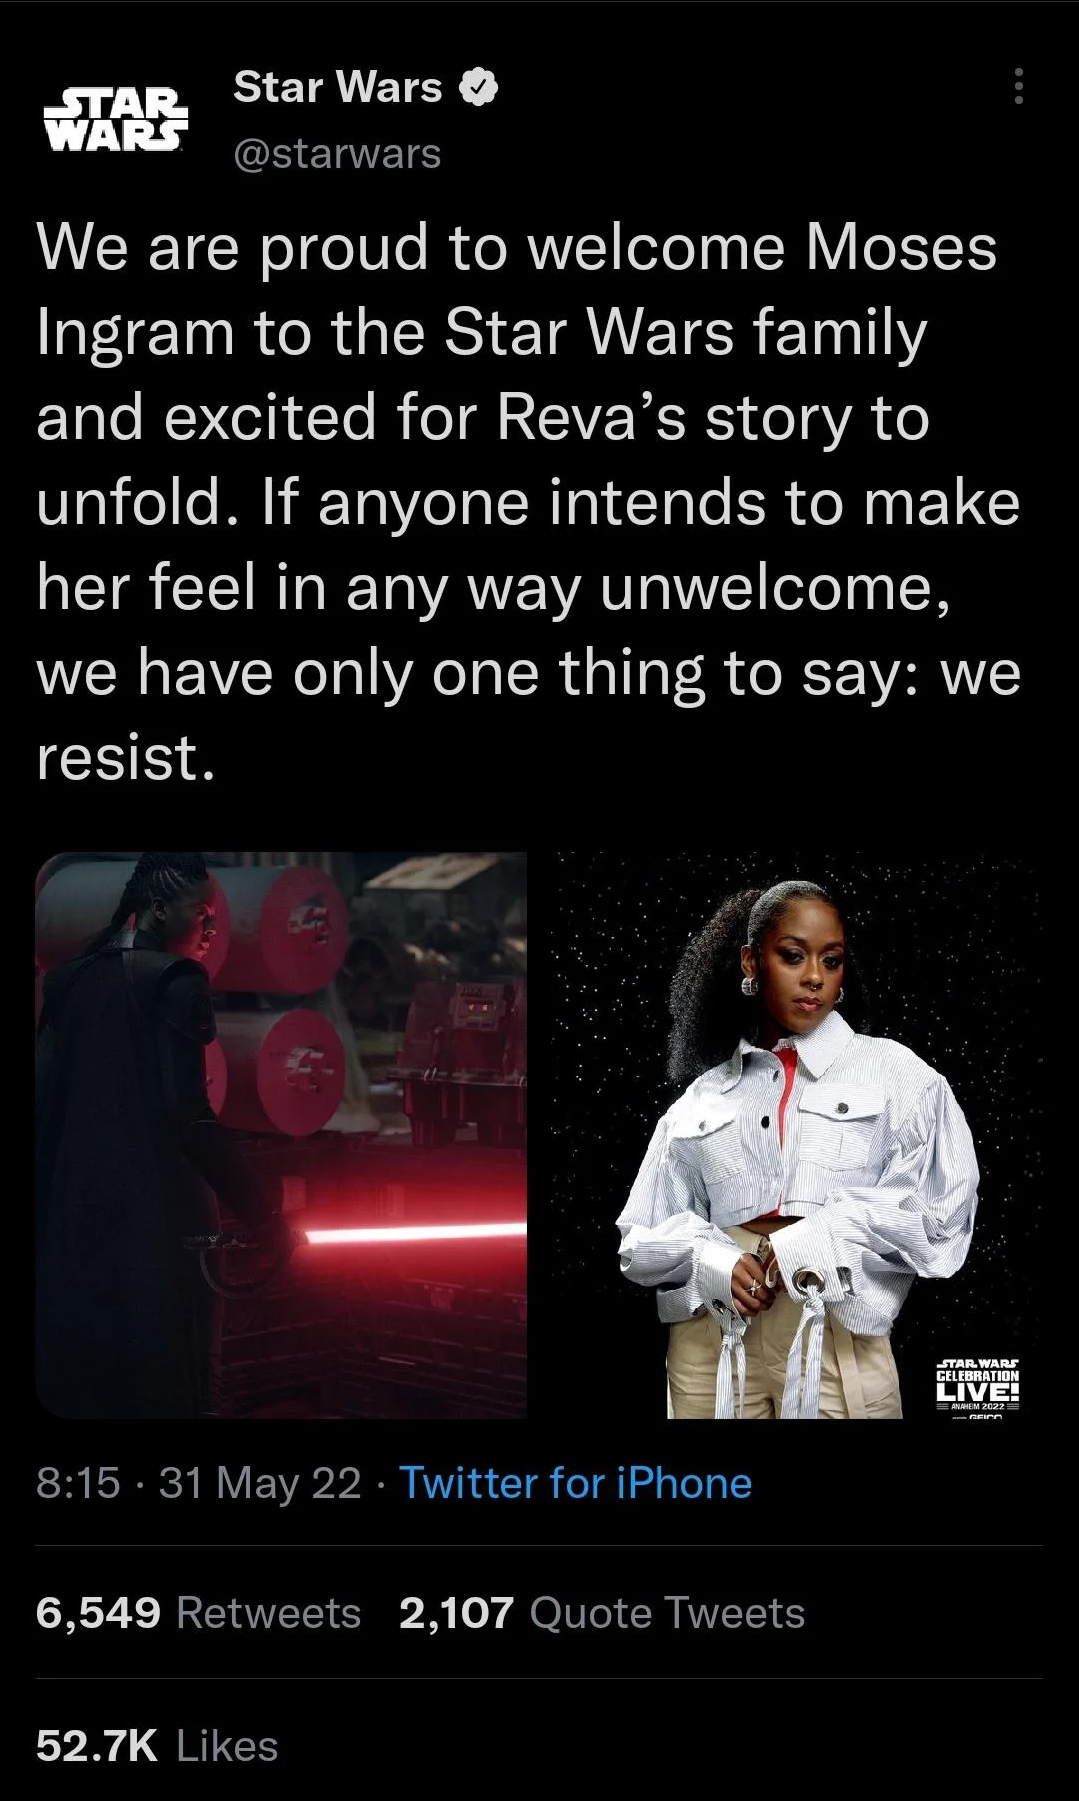 Star Wars on Twitter: We are proud to welcome Moses Ingram to the Star  Wars family and excited for Reva's story to unfold. If anyone intends to  make her feel in any